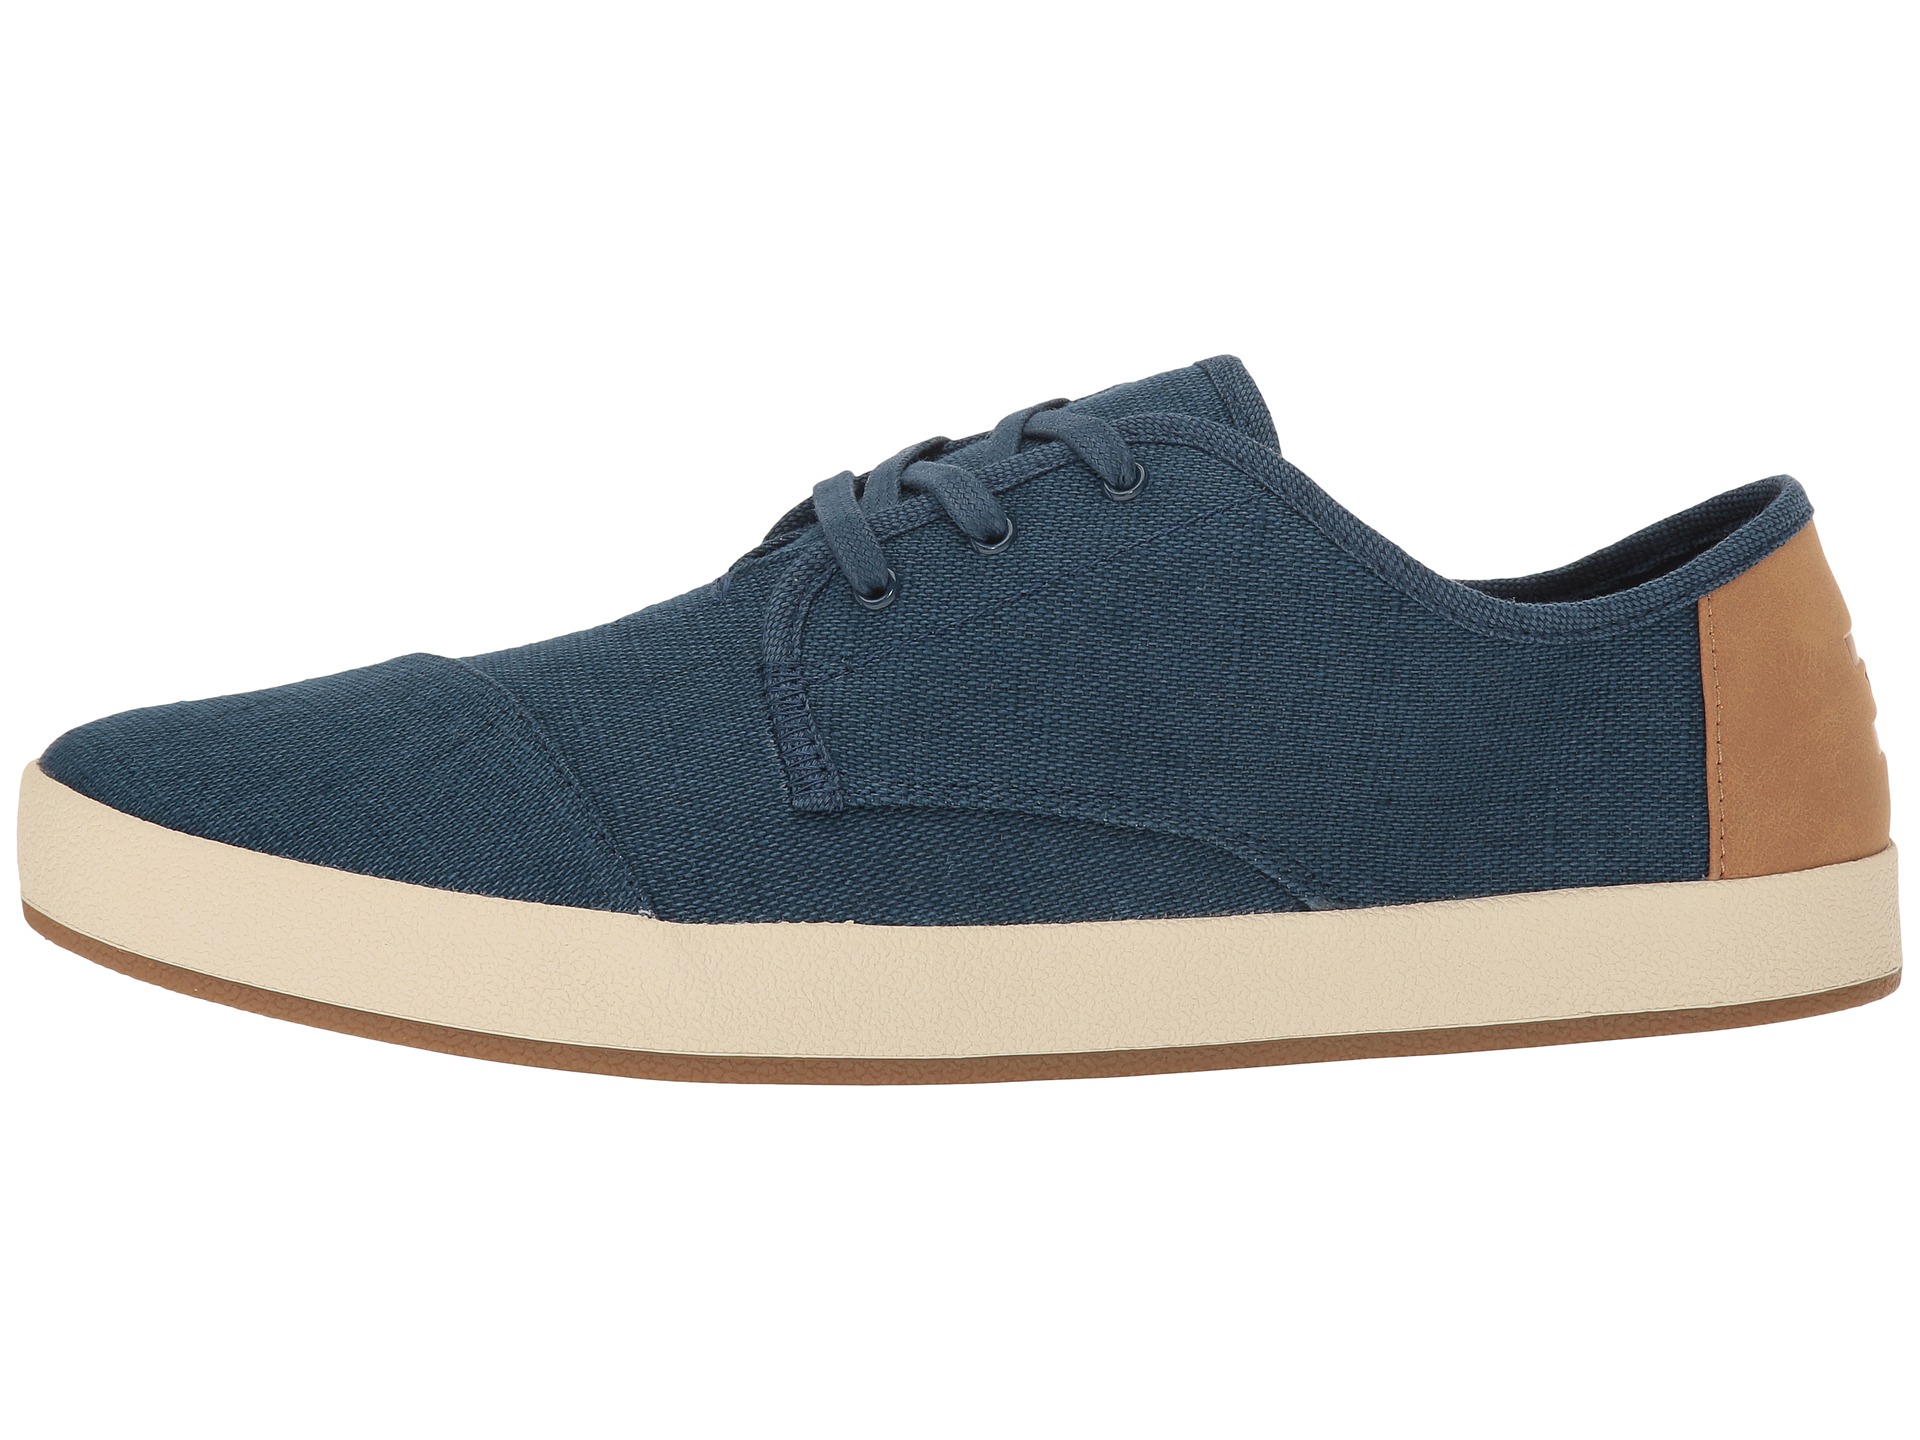 TOMS Paseo Sneaker at Zappos.com